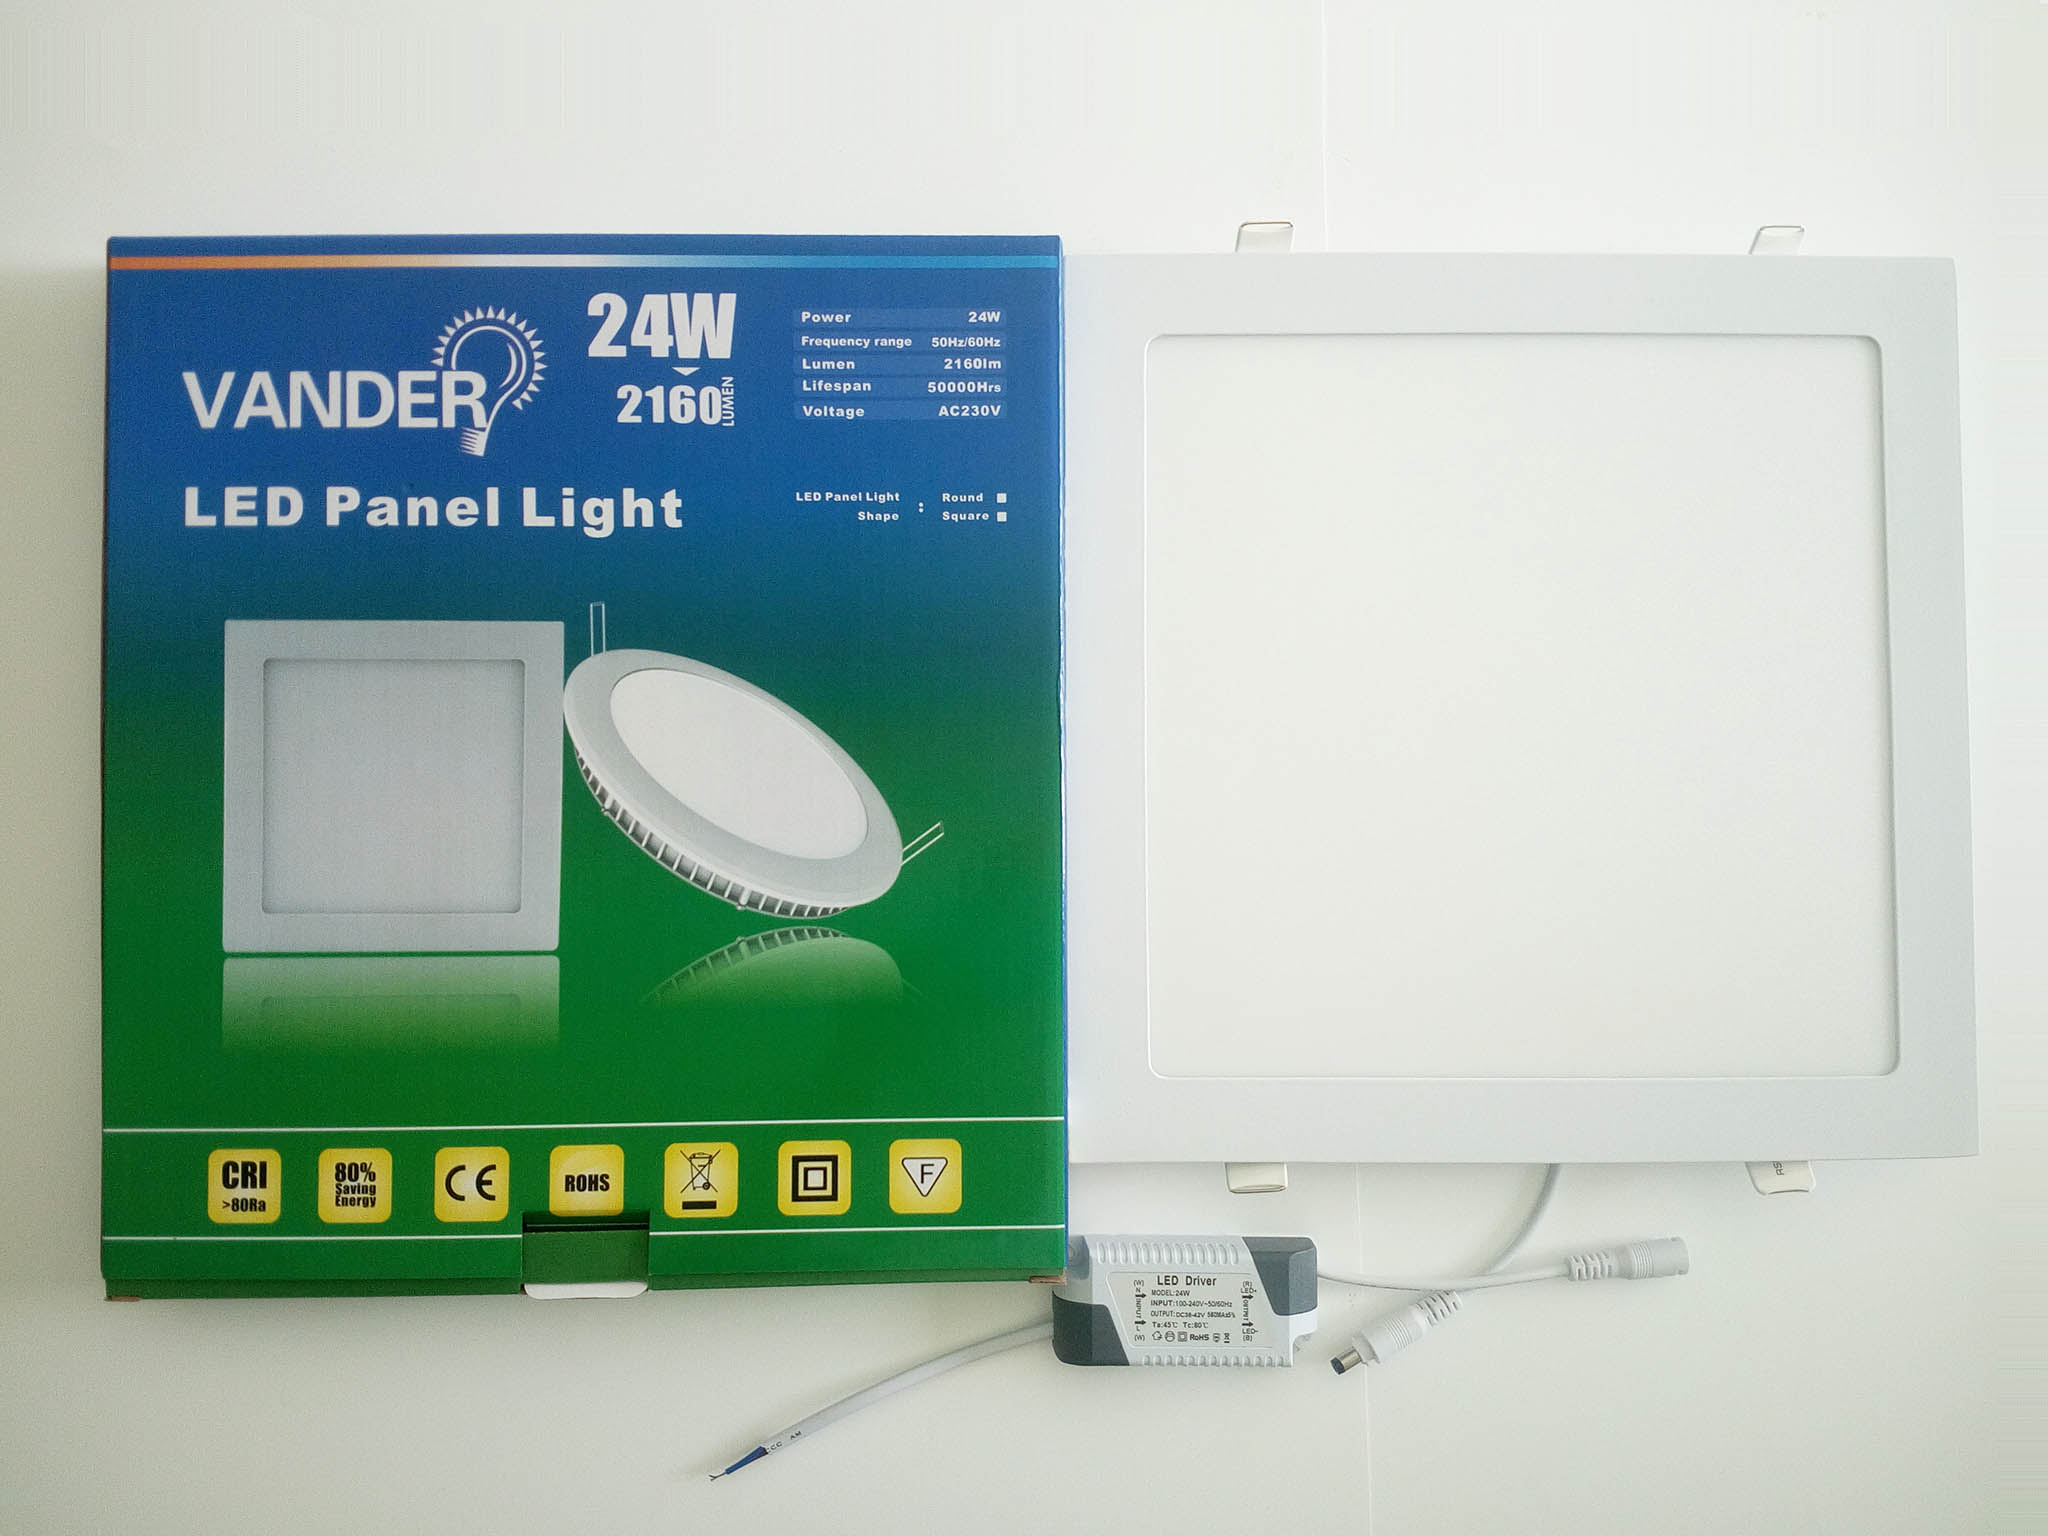 Colorful box package LED panel light 24W